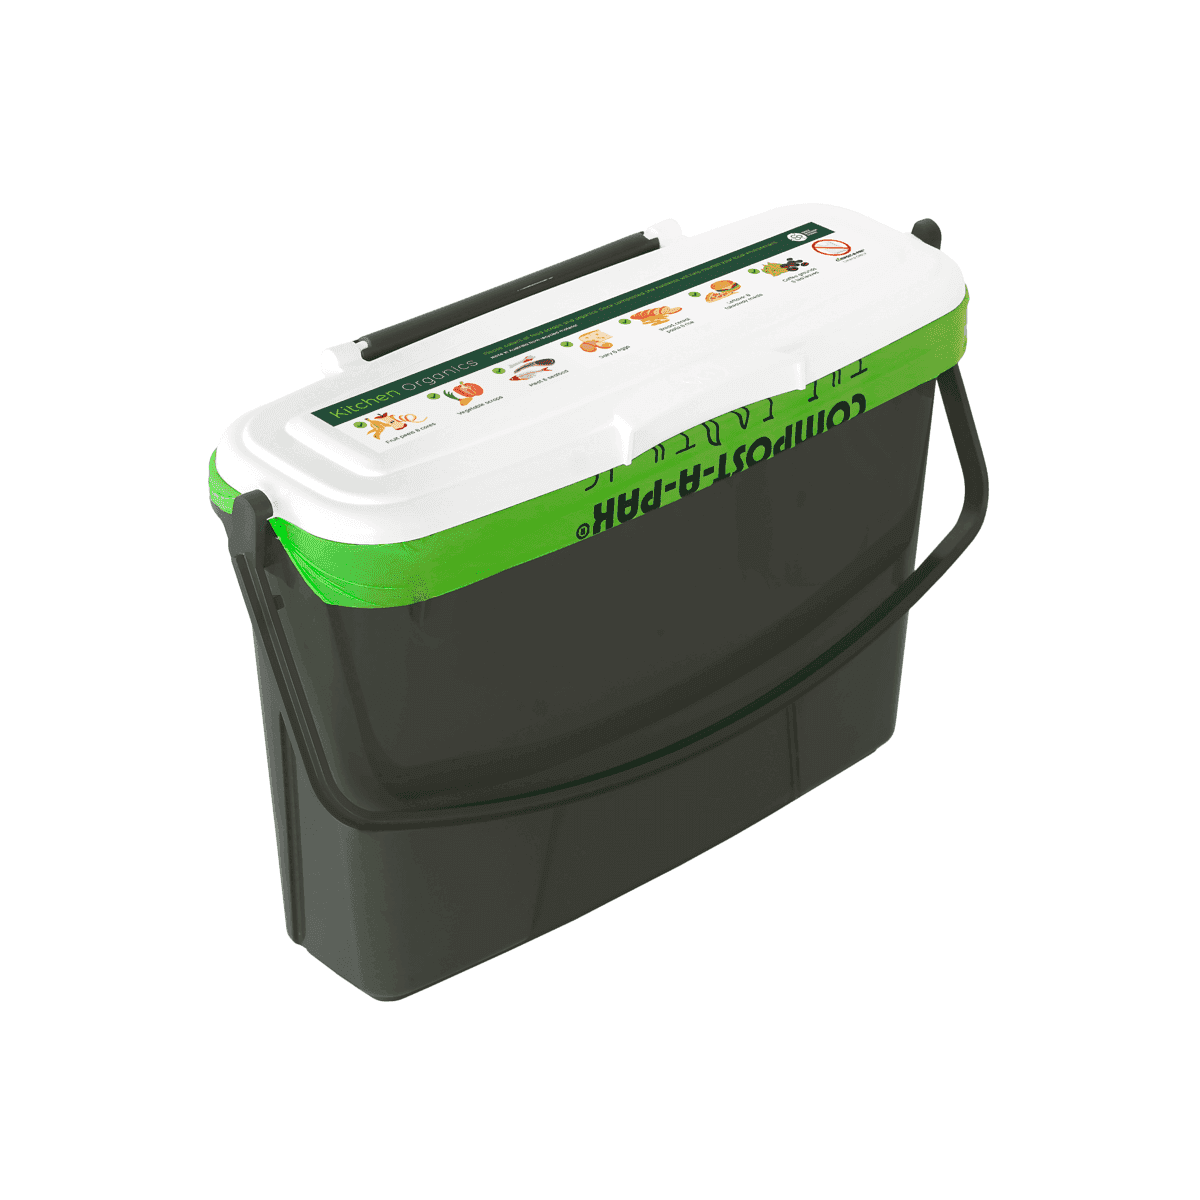 Compost-A-Pak Liners and Caddy